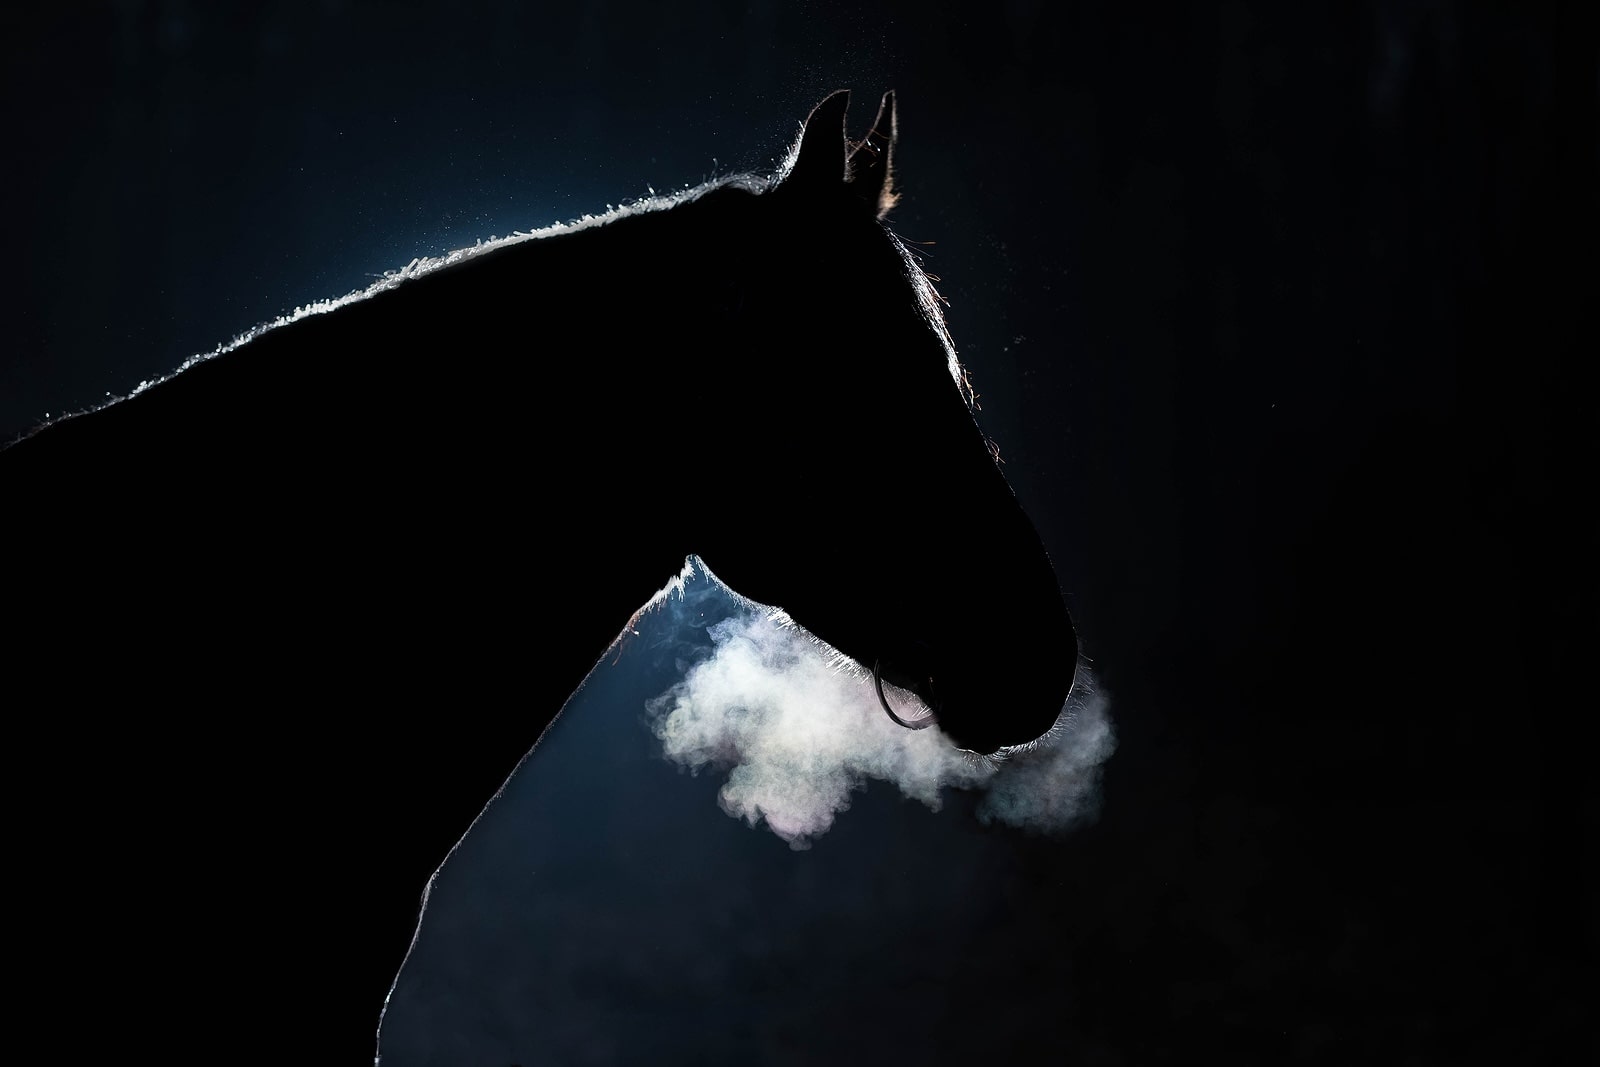 A horse breathing